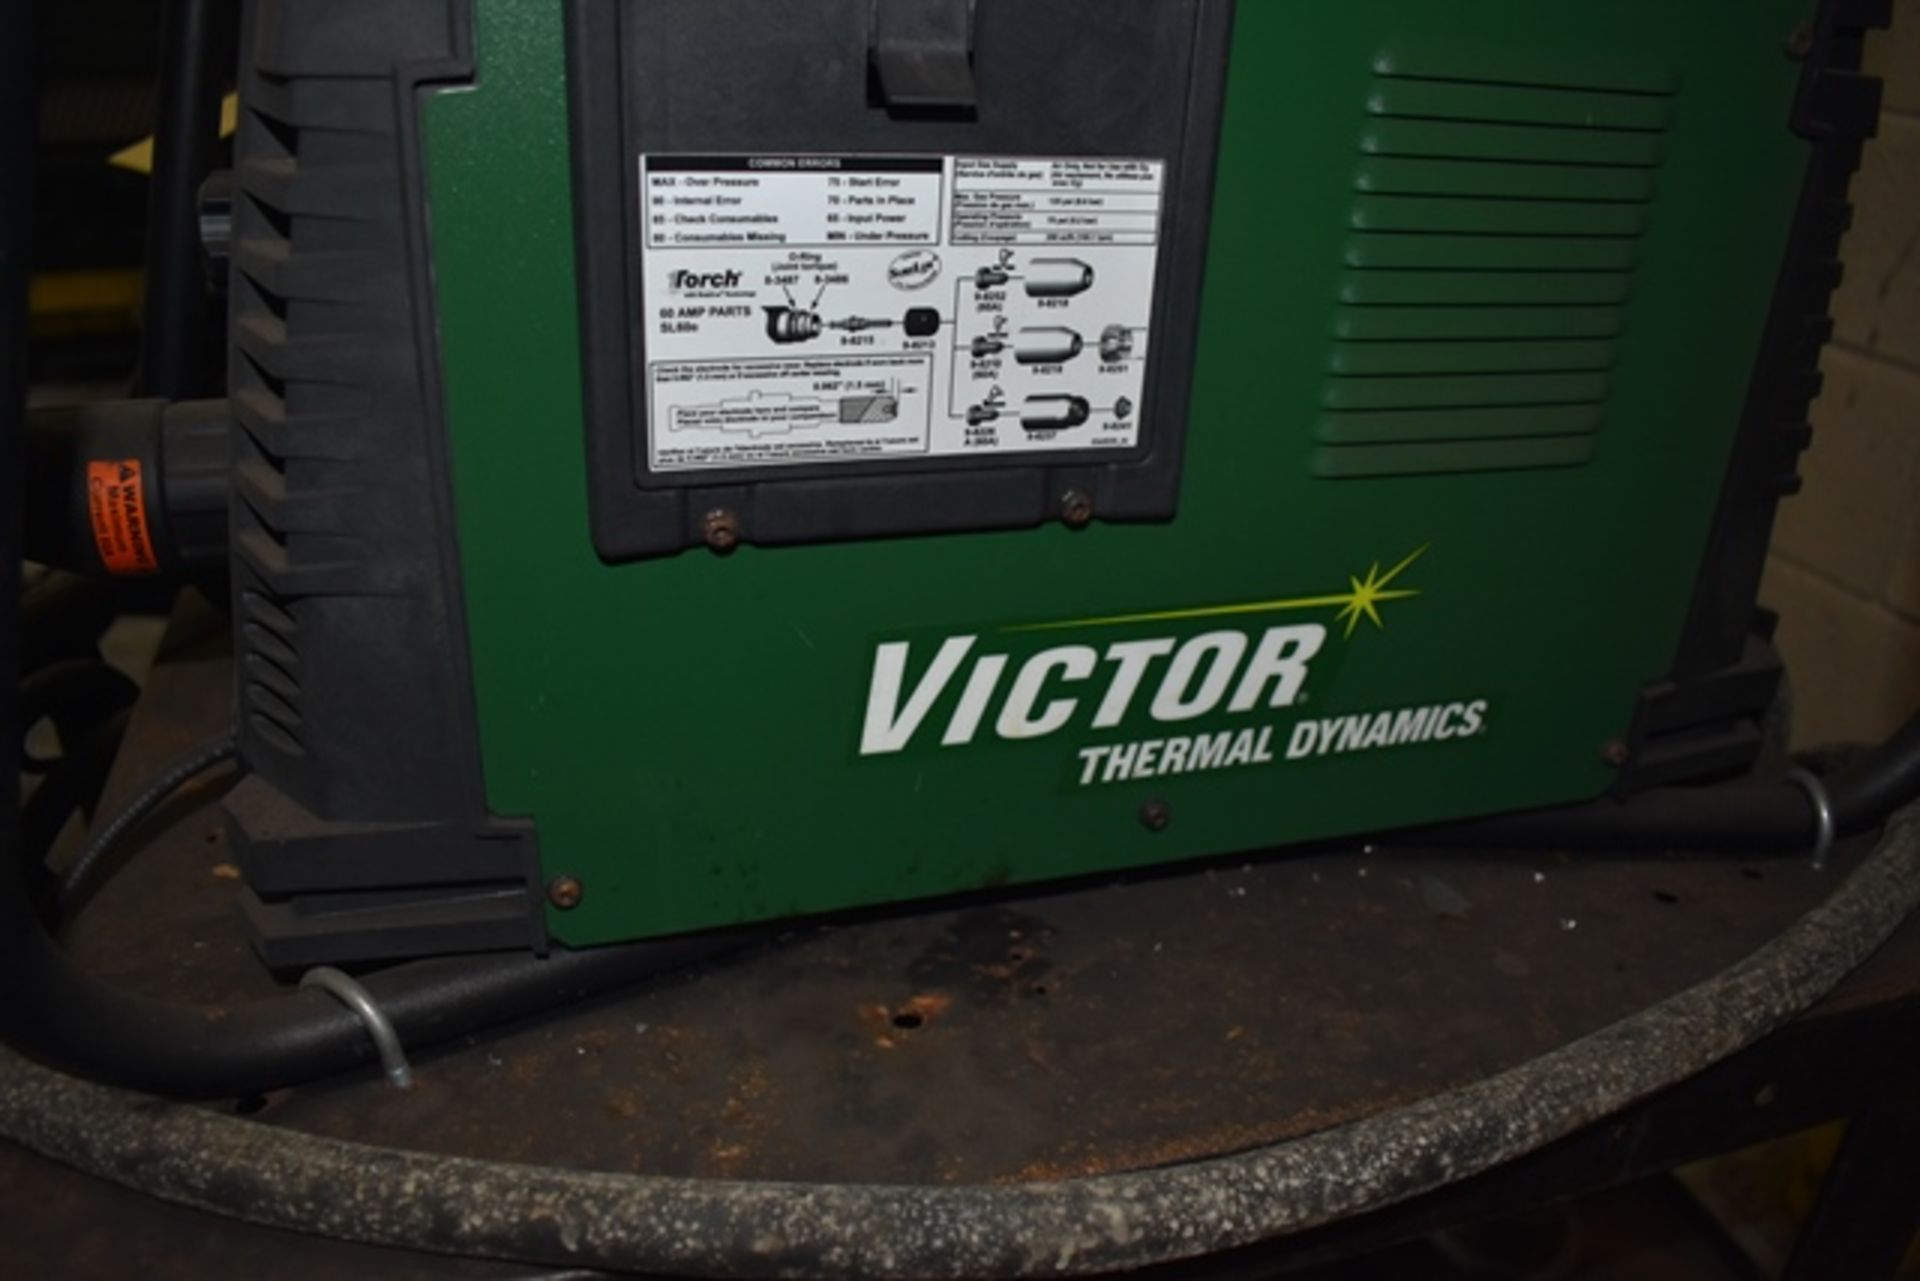 Victor/Thermal Dynamics plasma cutter, mod. Cutmaster 52, s/n MX1408034567 - Image 2 of 2